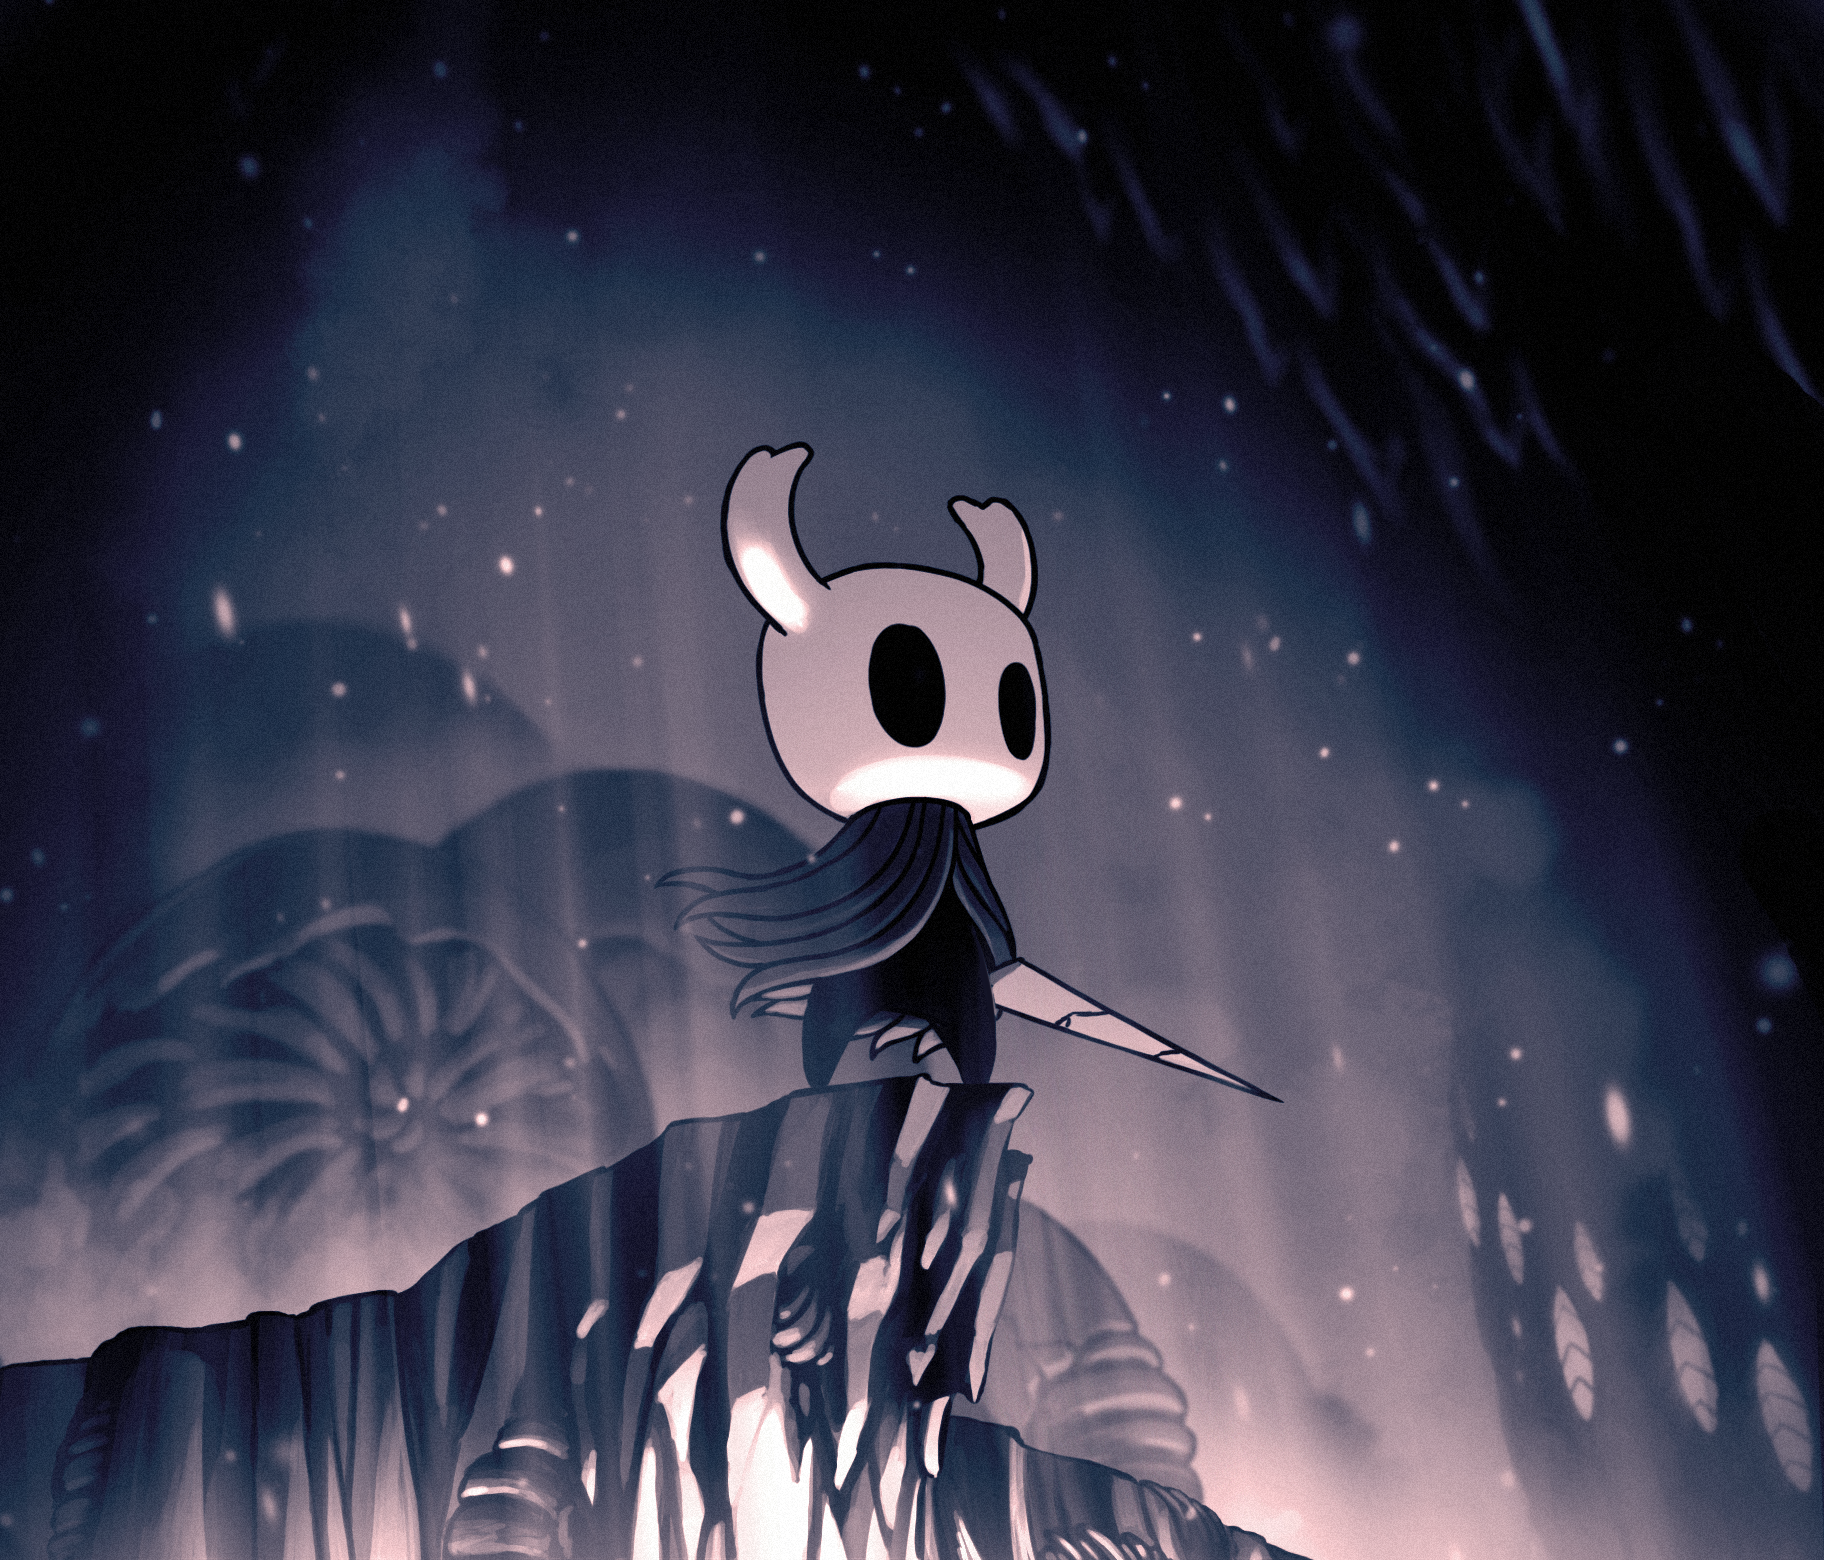 A bug with a skeletal looking head, called the Knight, is standing at the edge of a cliff, overlooking the darkness.